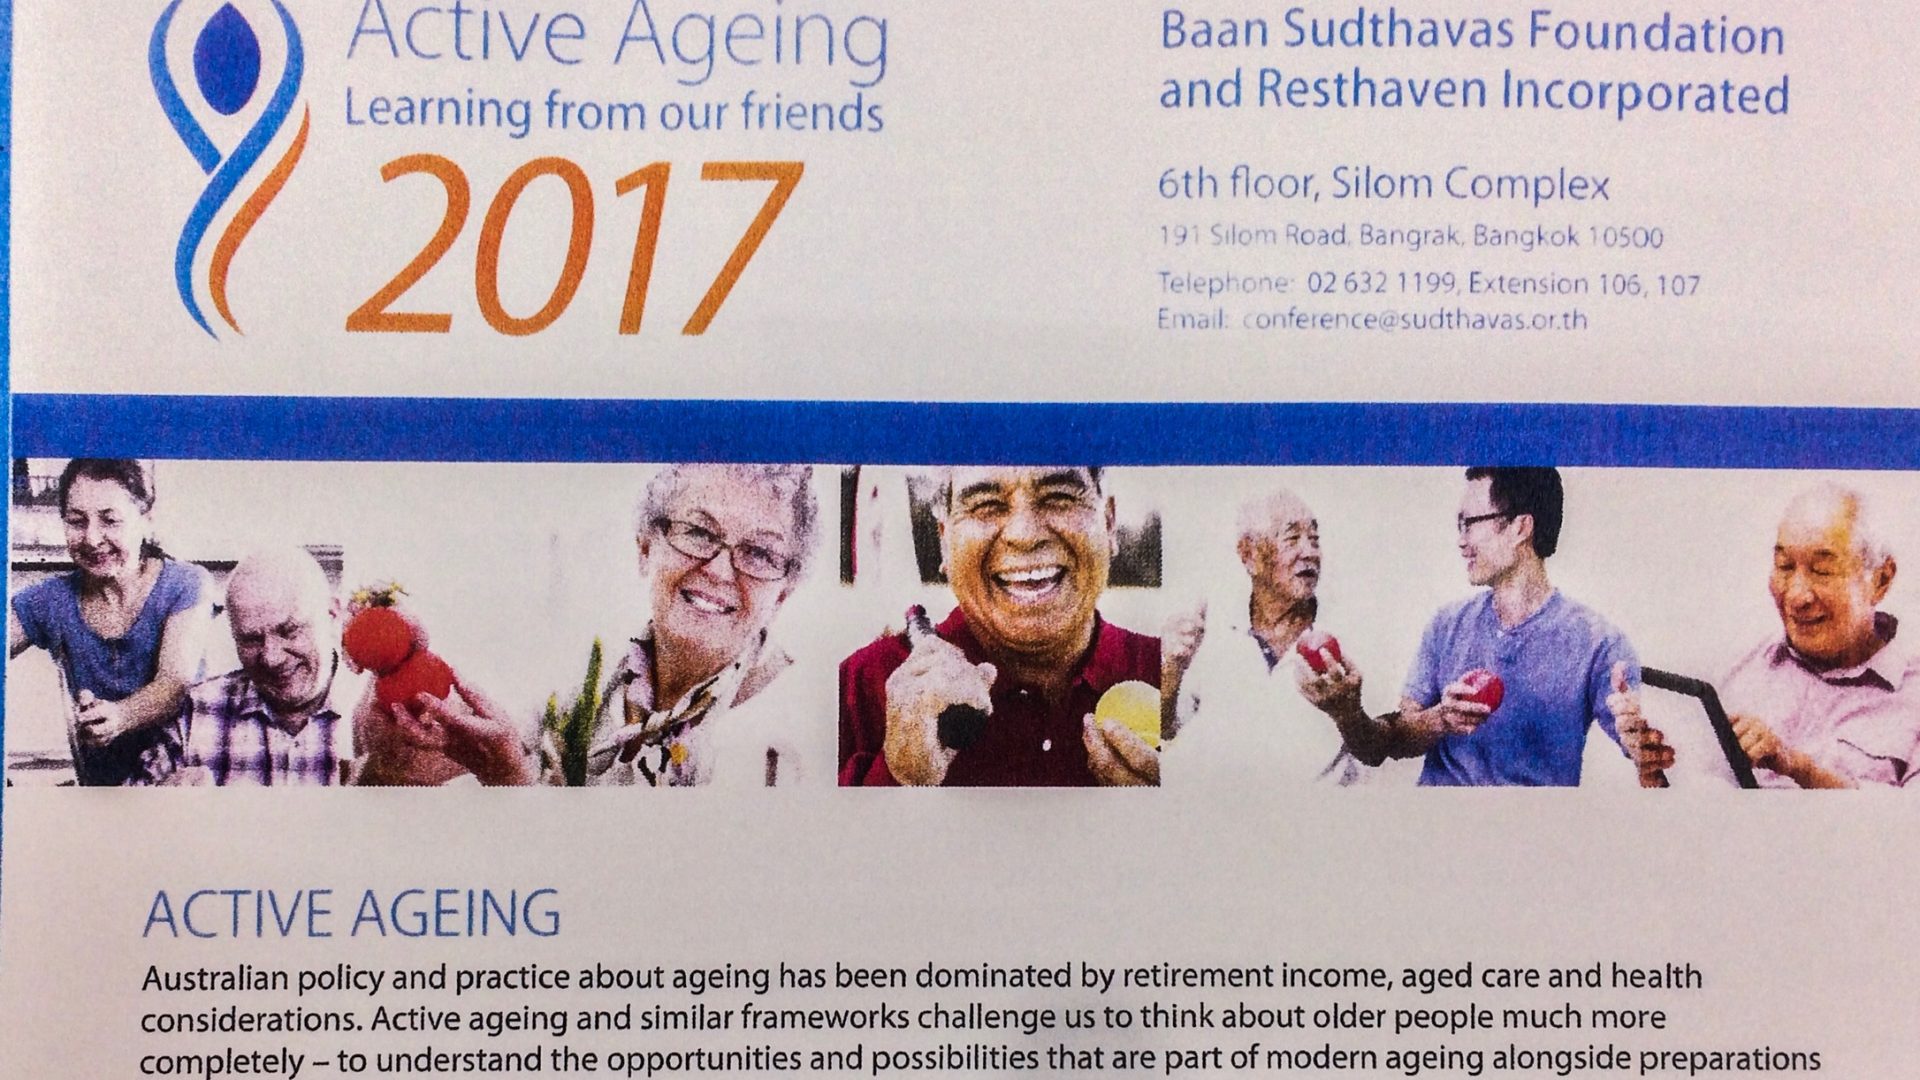 “Active Aging – Learning from Our Friends” Seminar in Bangkok on September 2017